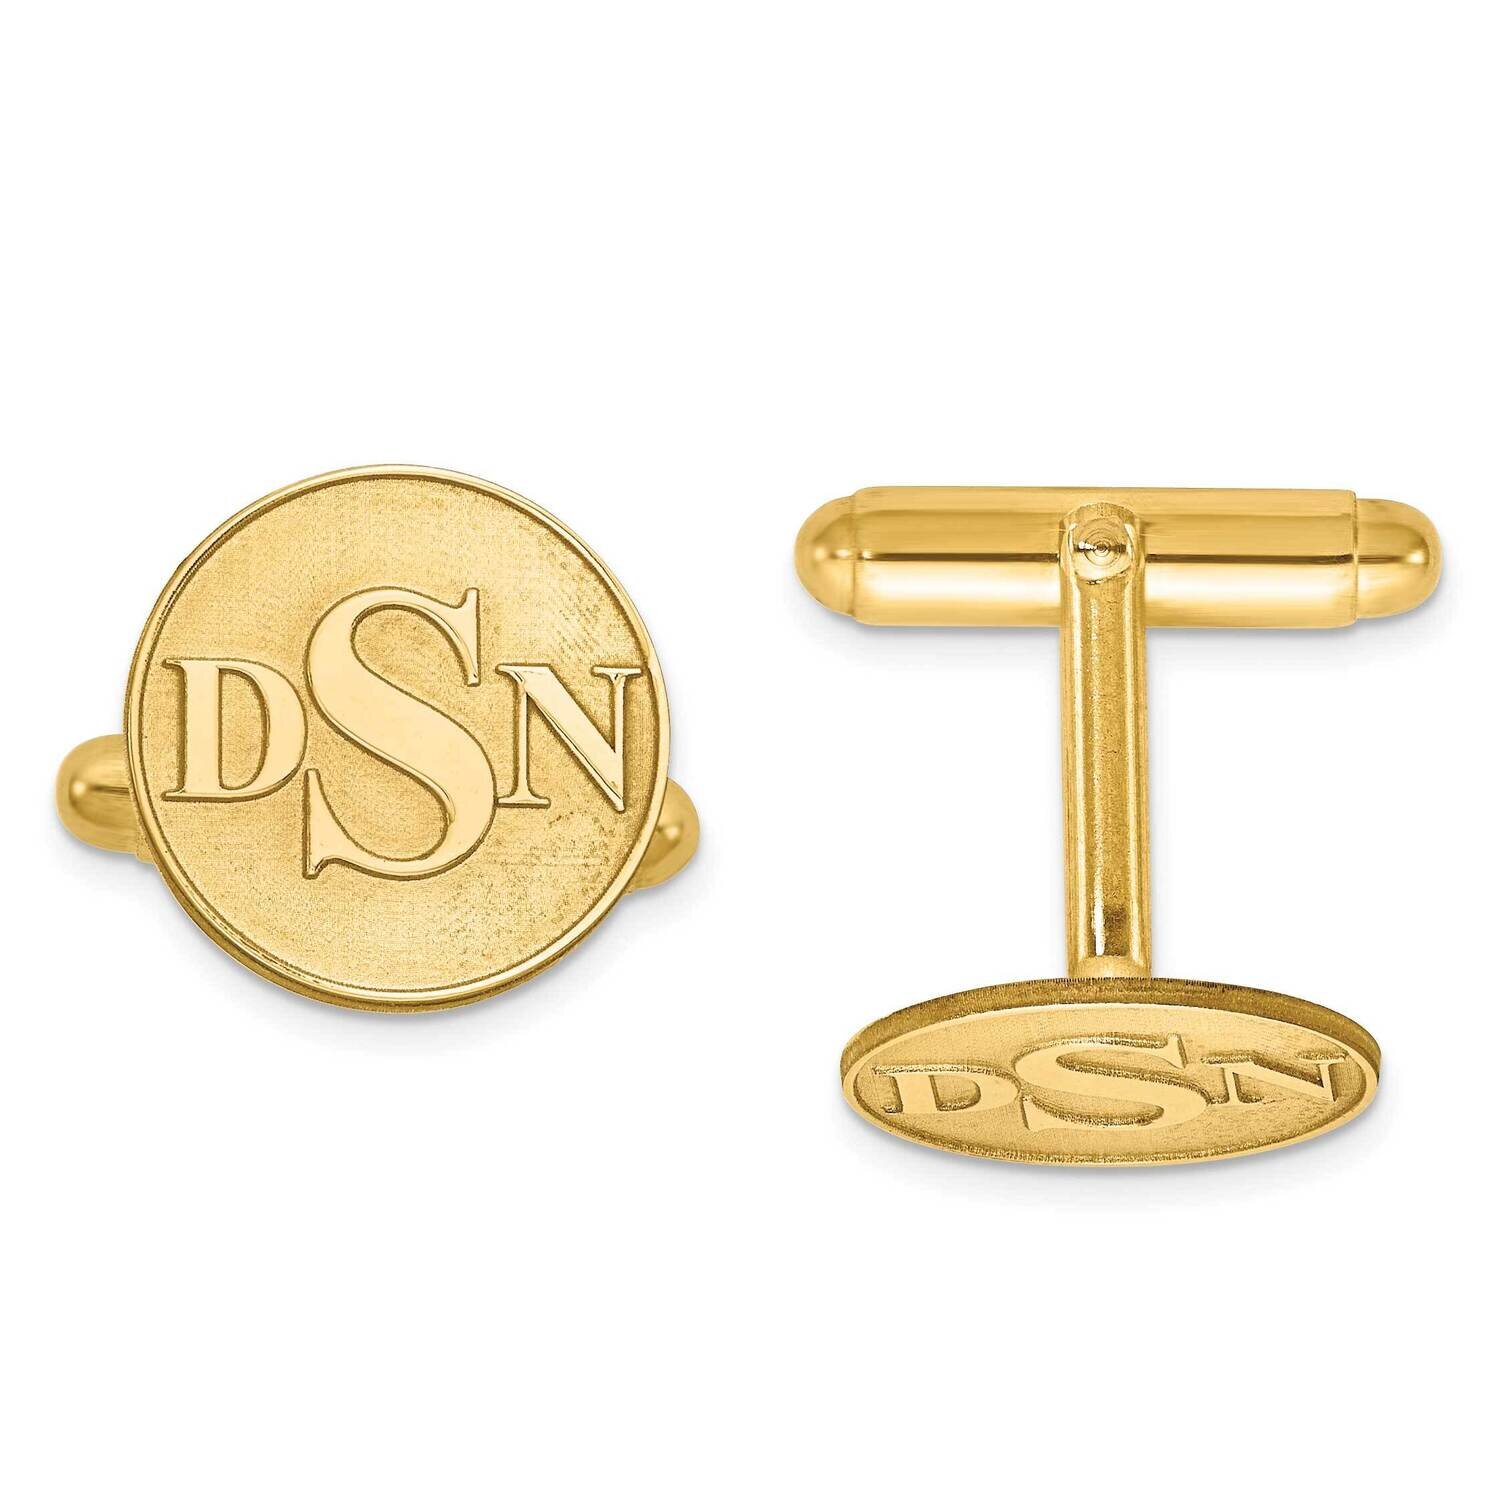 Raised Letters Circle Monogram Cuff Links 14k Gold XNA618Y